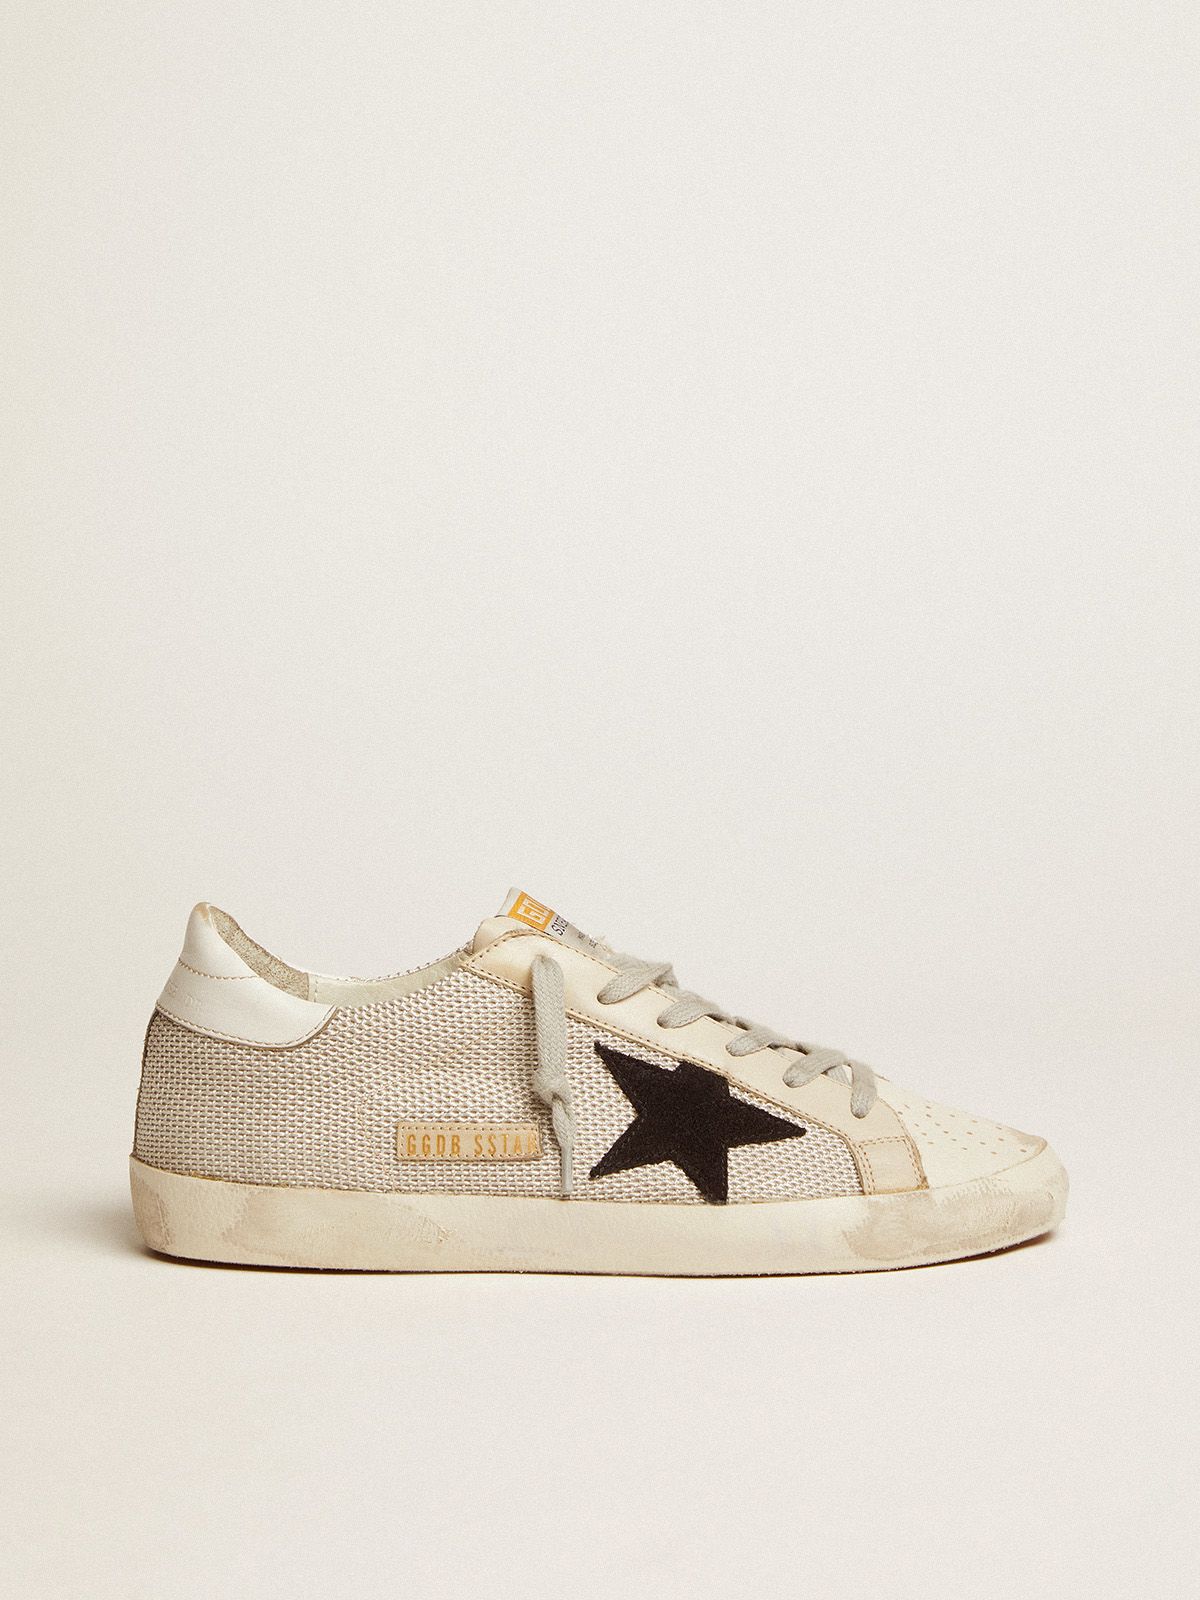 golden goose with insert in sneakers leather Super-Star mesh